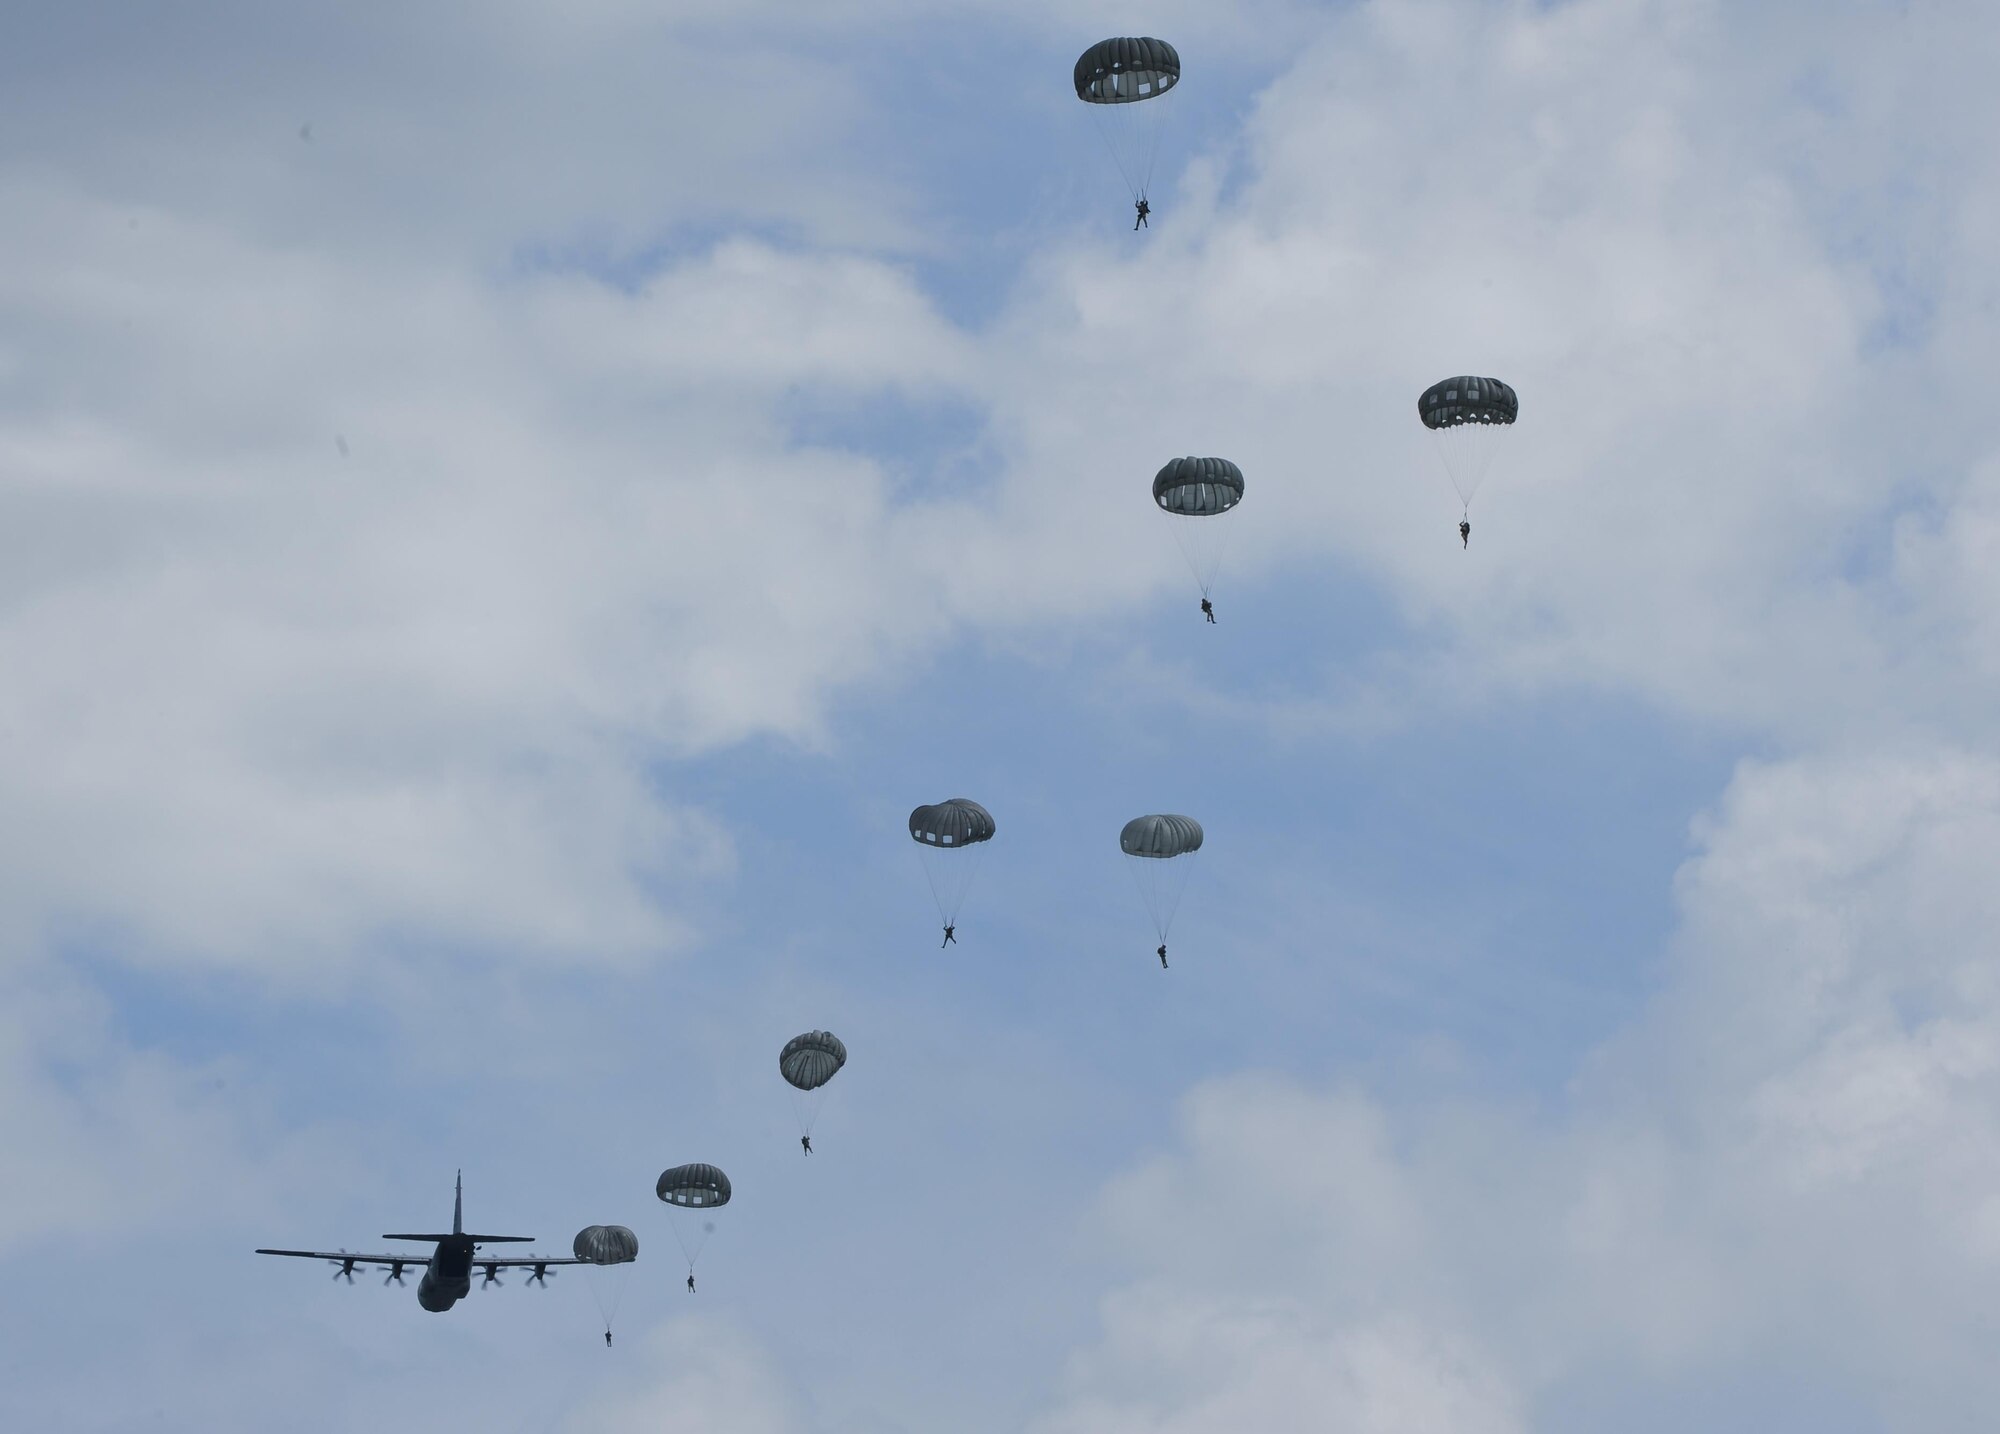 Paratroopers exit a C-130J Super Hercules during International Jump Week near Alzey, Germany, July 7, 2015. During jump week, more than 200 U.S. and allied partners disembarked their designated airframes to strengthen skills and tactics, while building and strengthening international relations with counterparts. (U.S. Air Force photo/Staff Sgt. Leslie Keopka) 